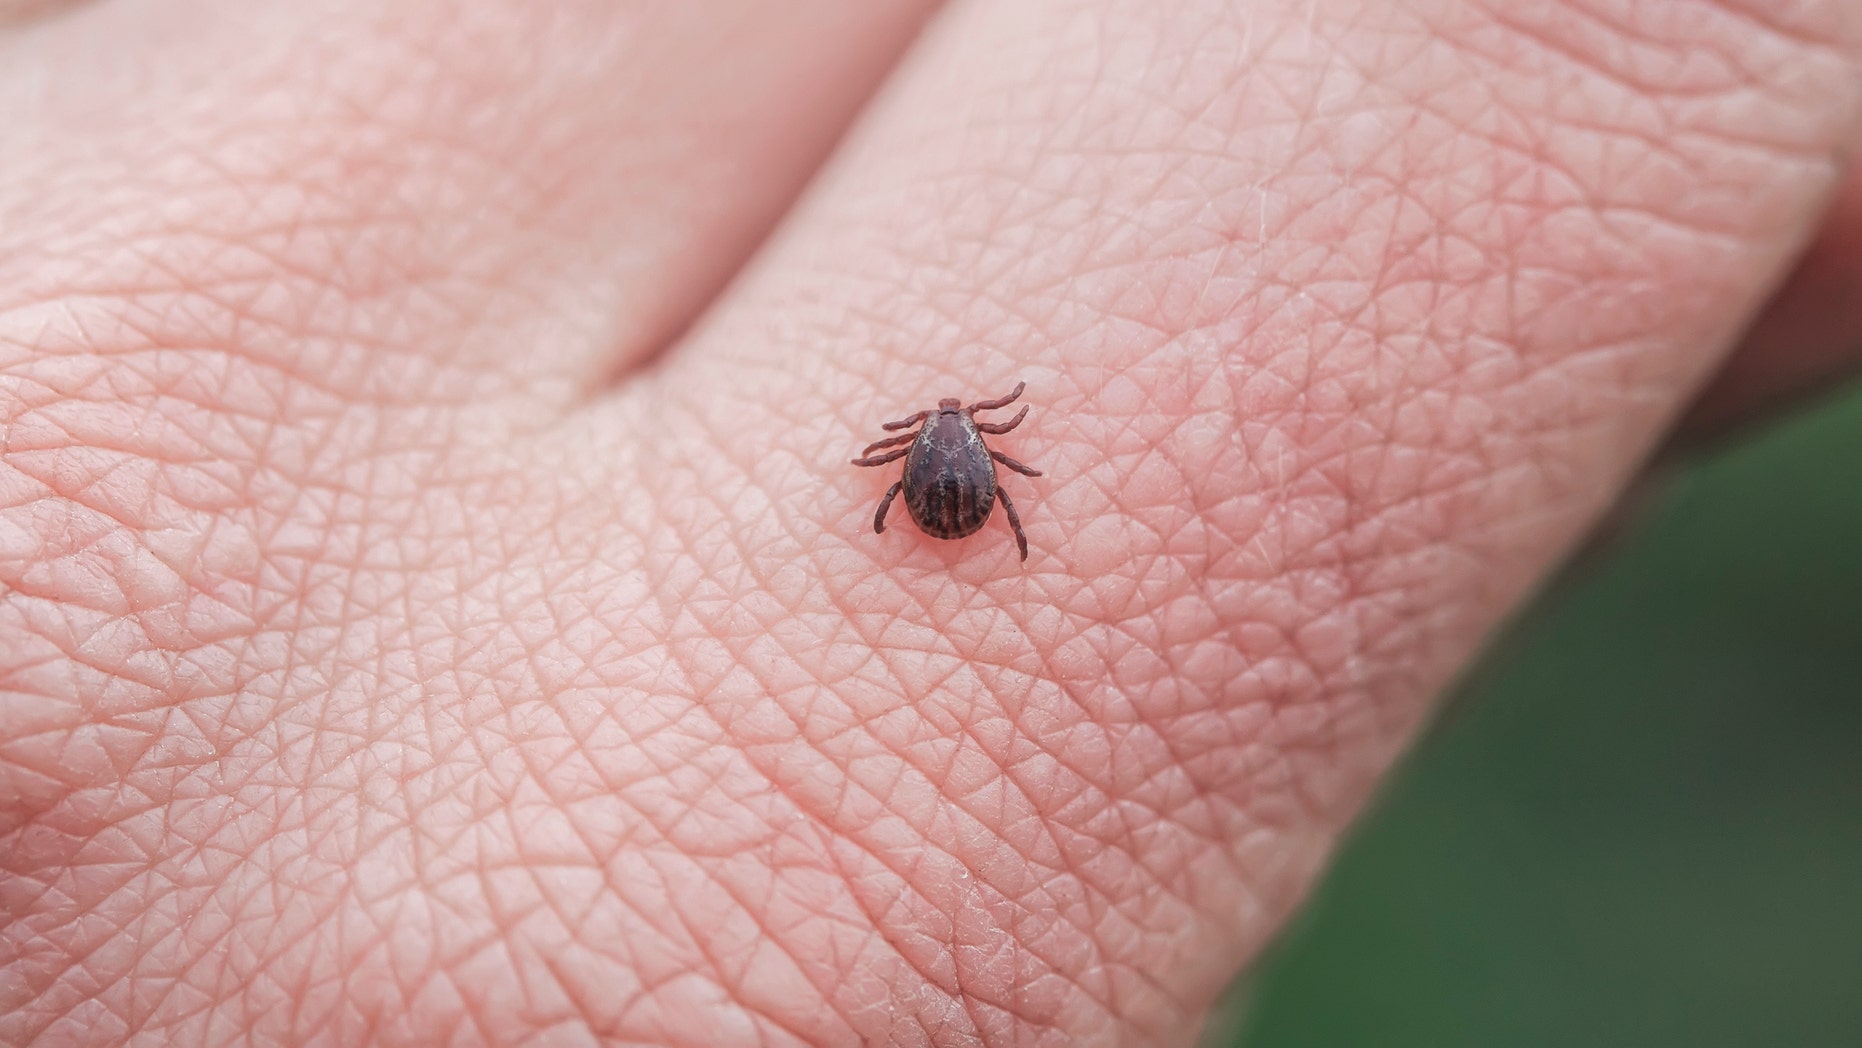 CDC discovered new natural tick and mosquito repellent, according to CDC news release